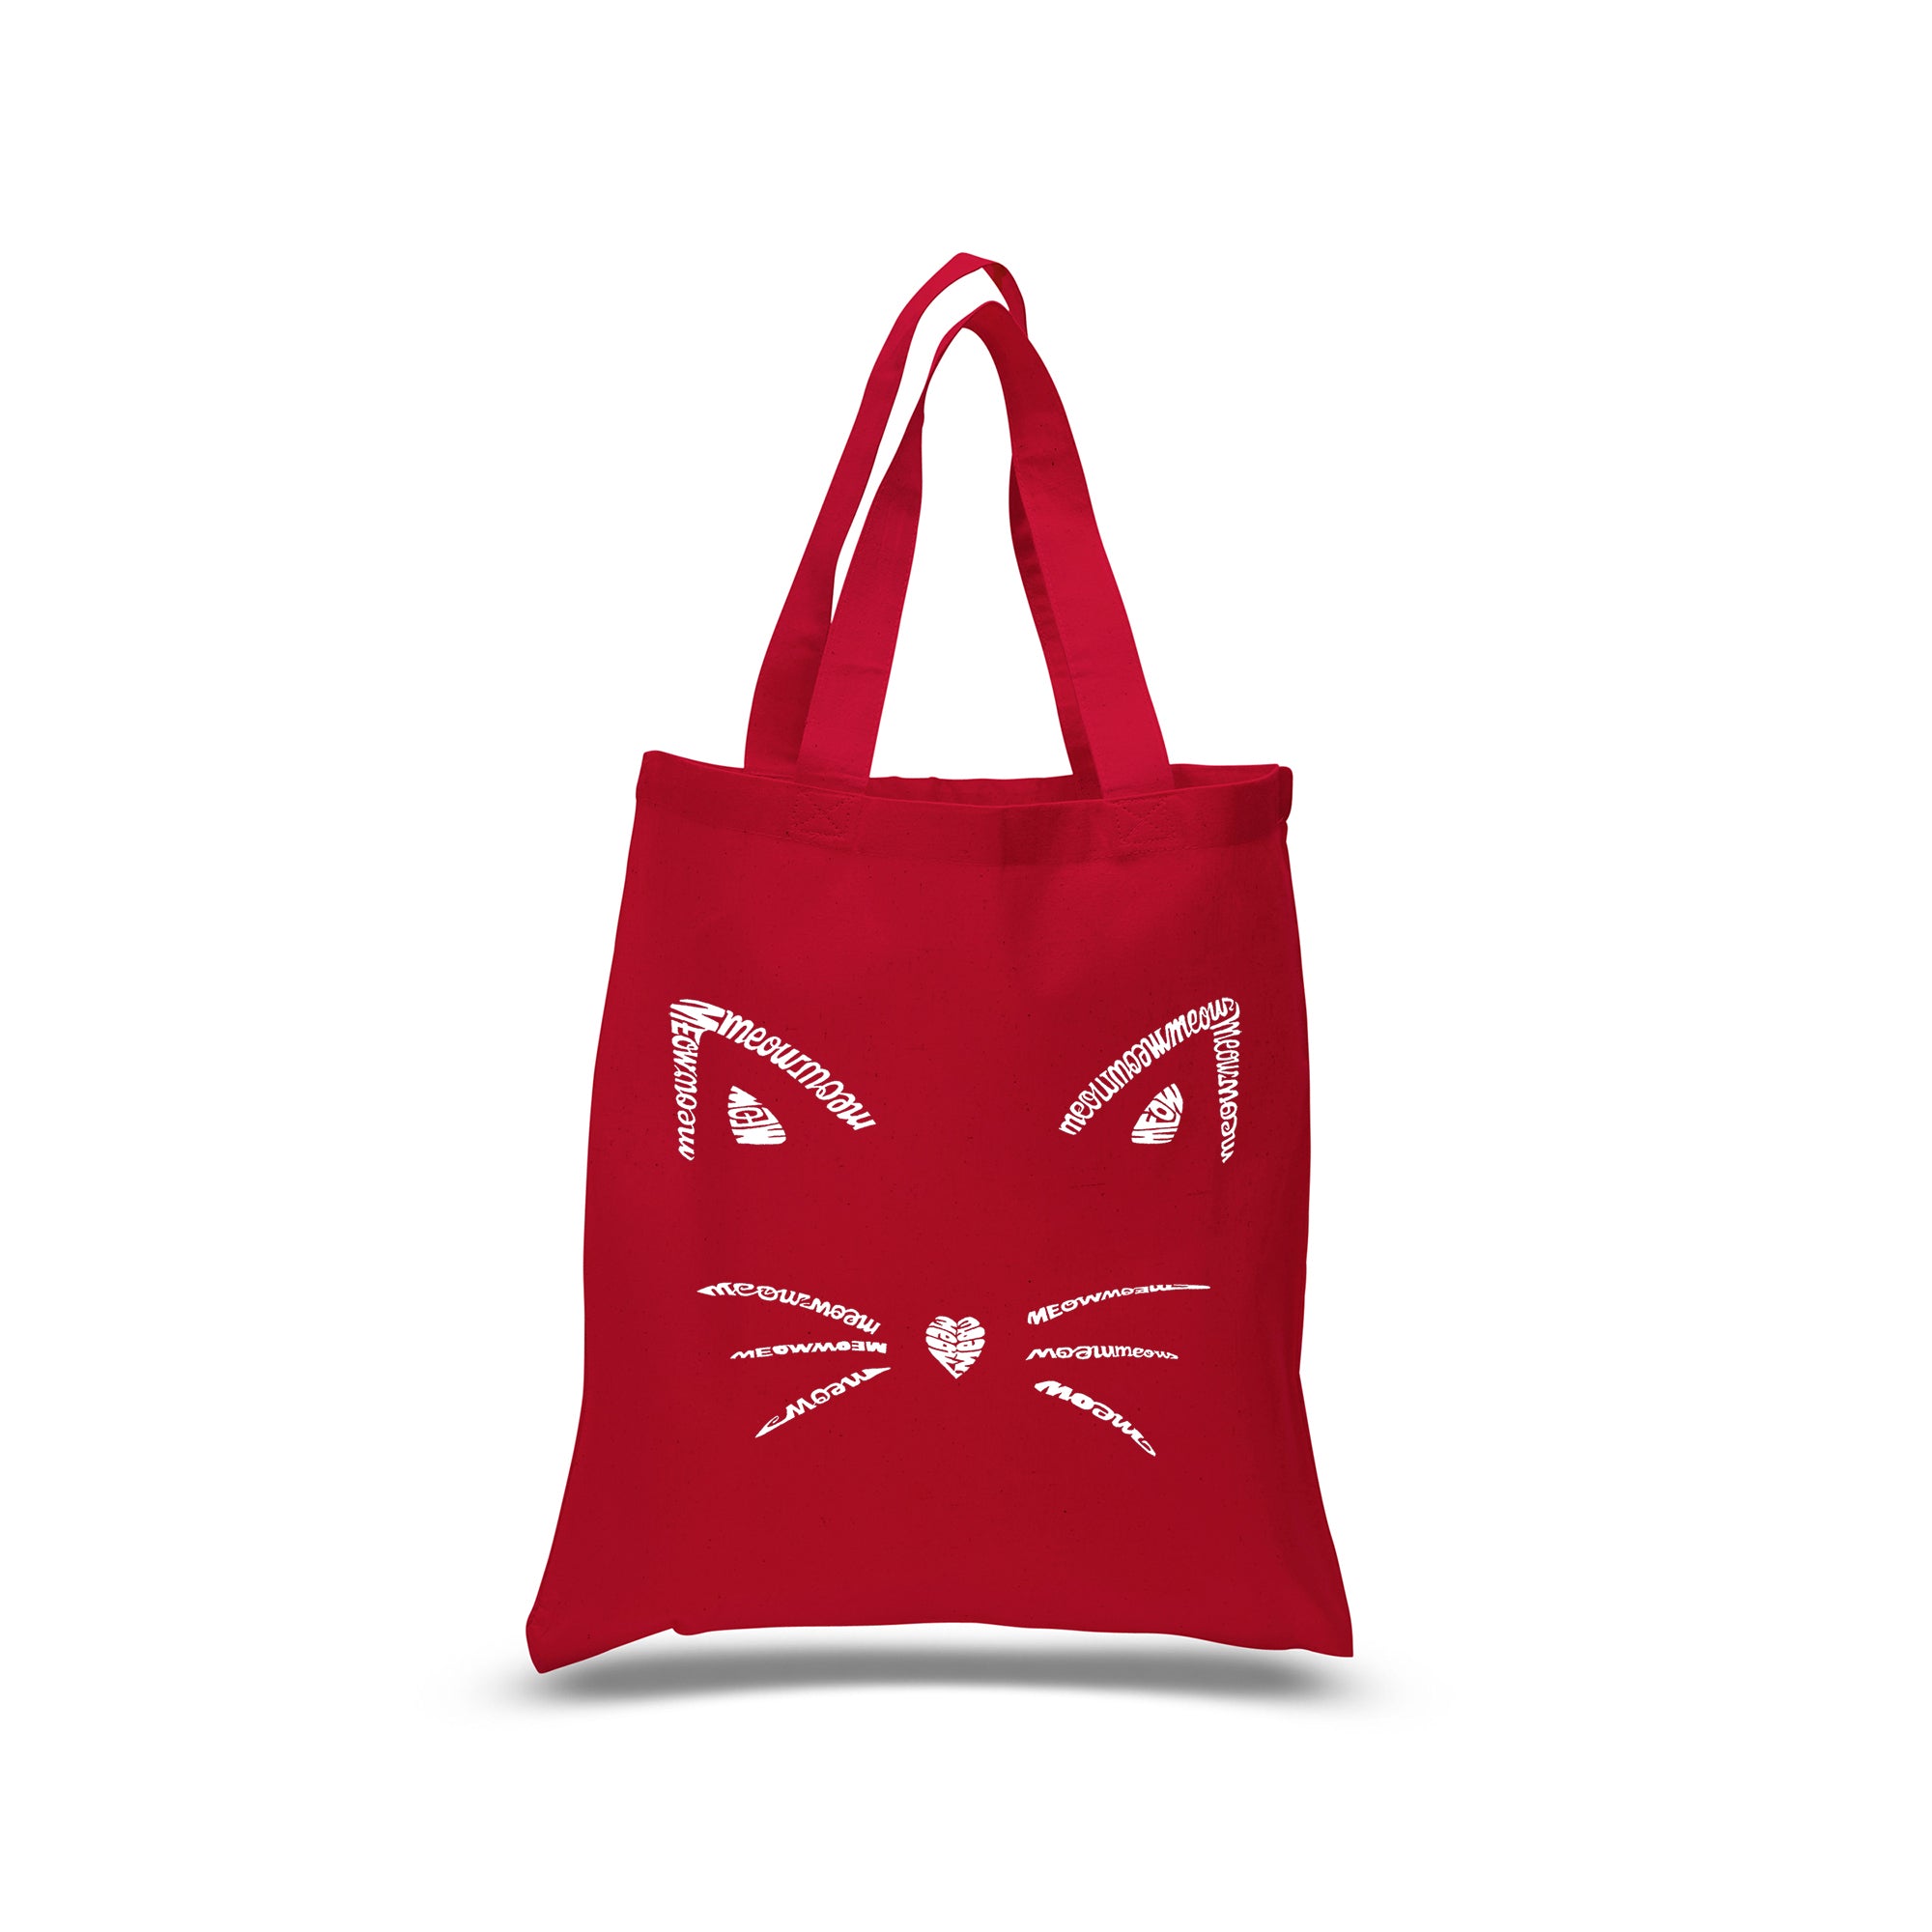 Whiskers - Small Word Art Tote Bag - Red - Small